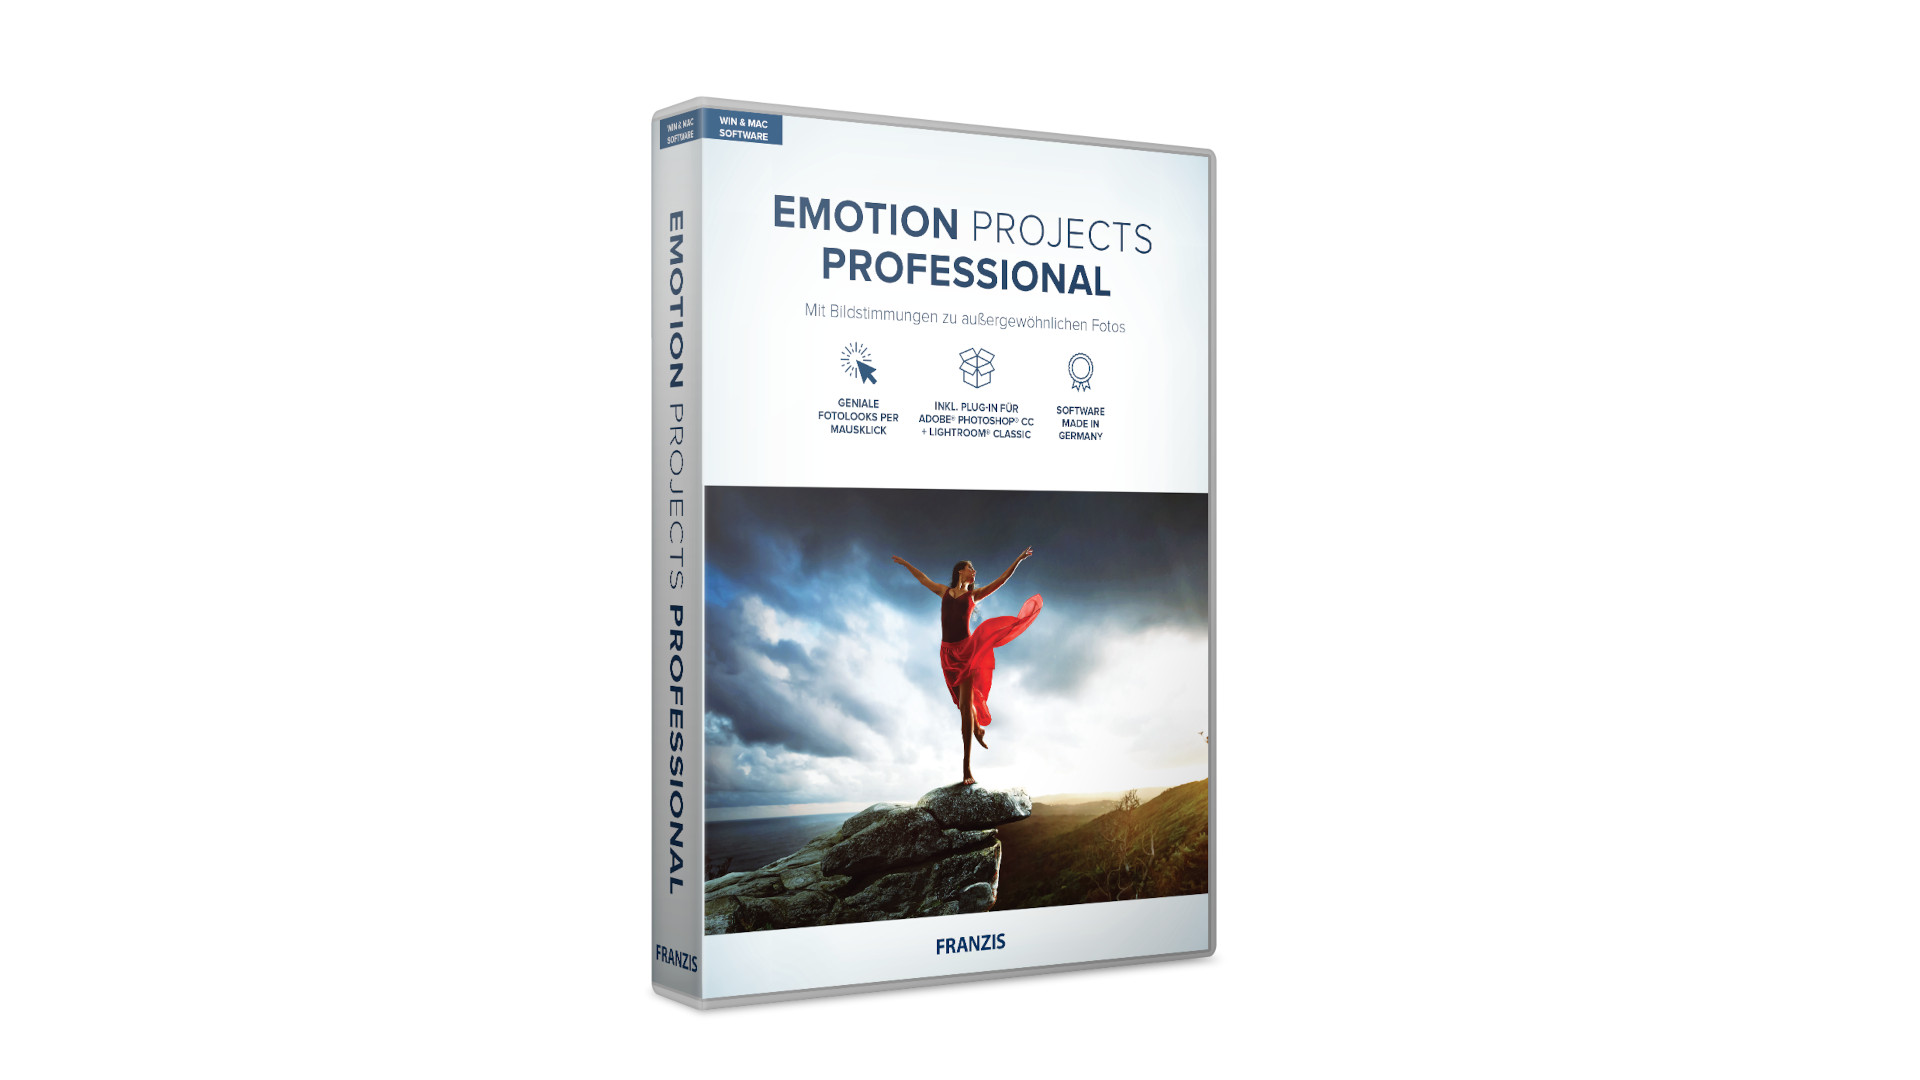 EMOTION Projects Professional - Project Software Key (Lifetime / 1 PC) 33.89 $